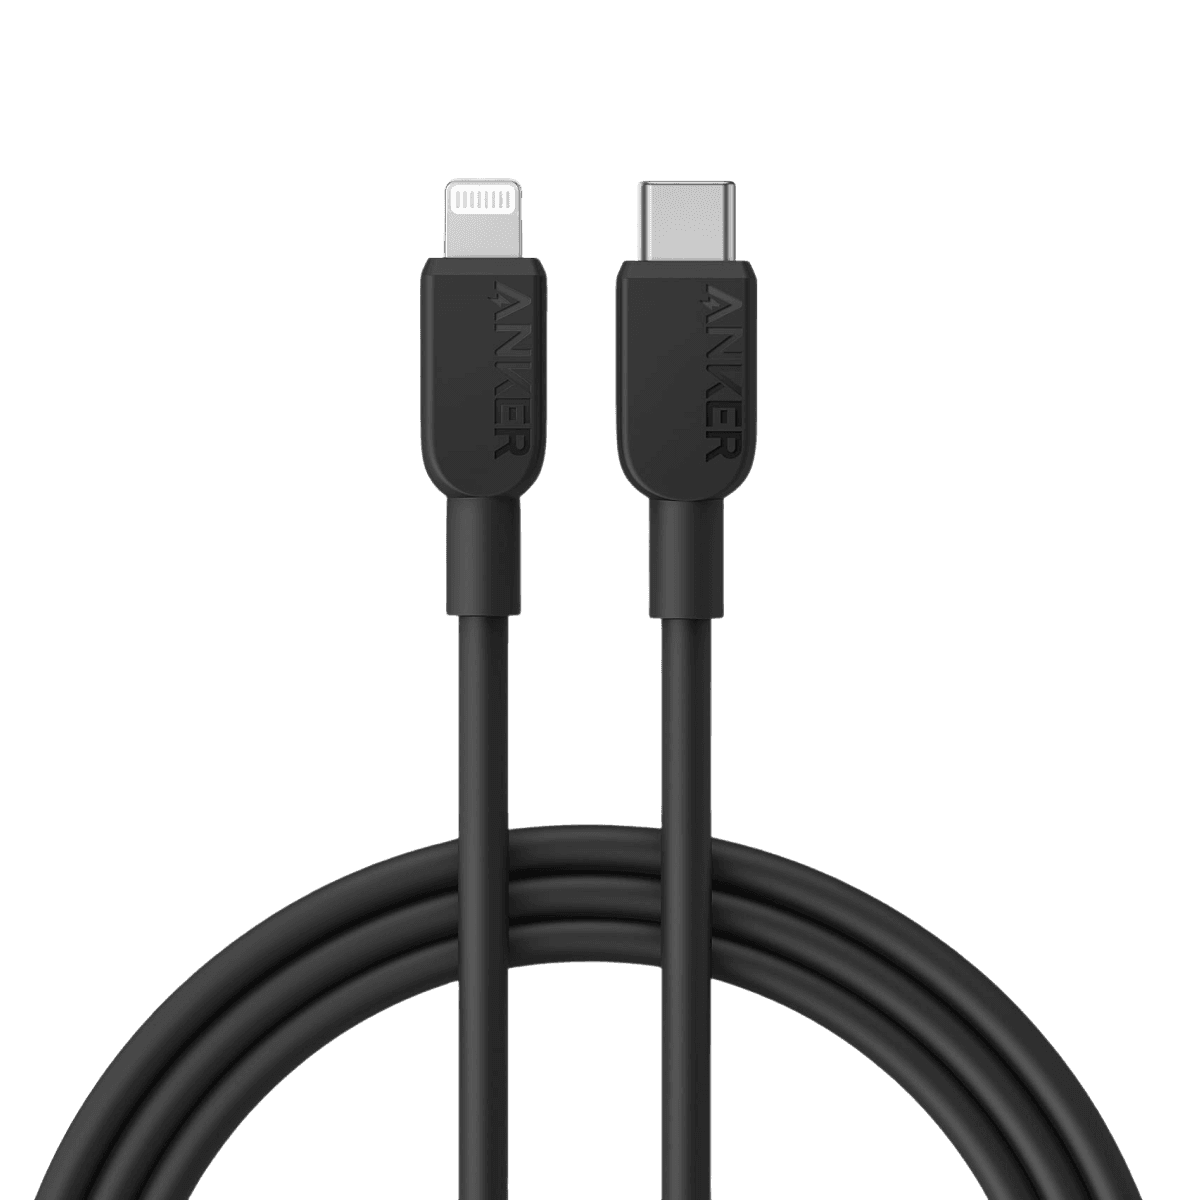 Anker <b>310</b> USB-C to Lightning Cable